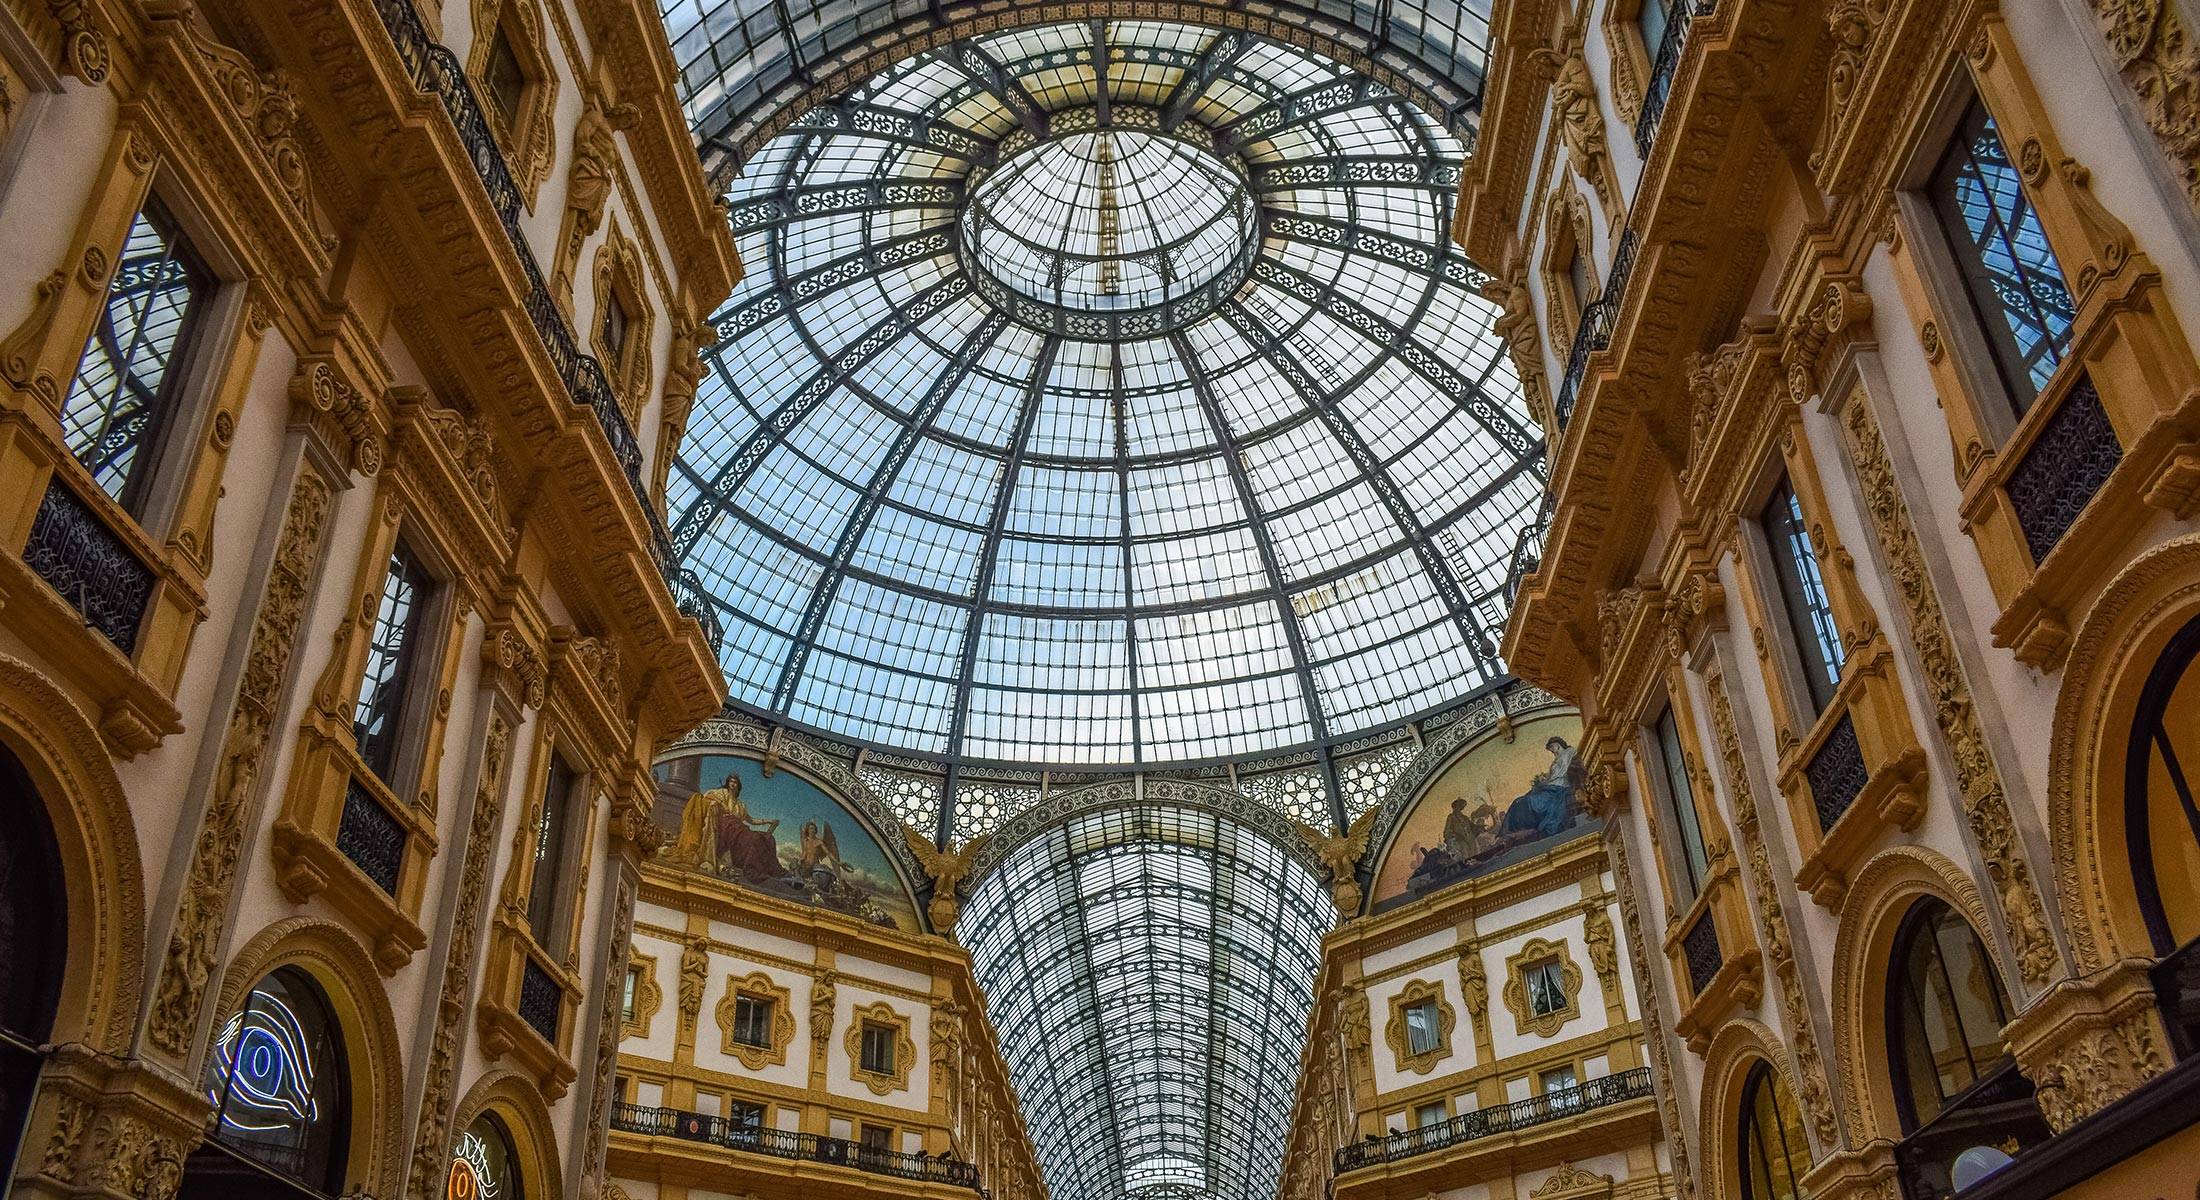 The 7 most notable Galleria Vittorio Emanuele II Facts - An